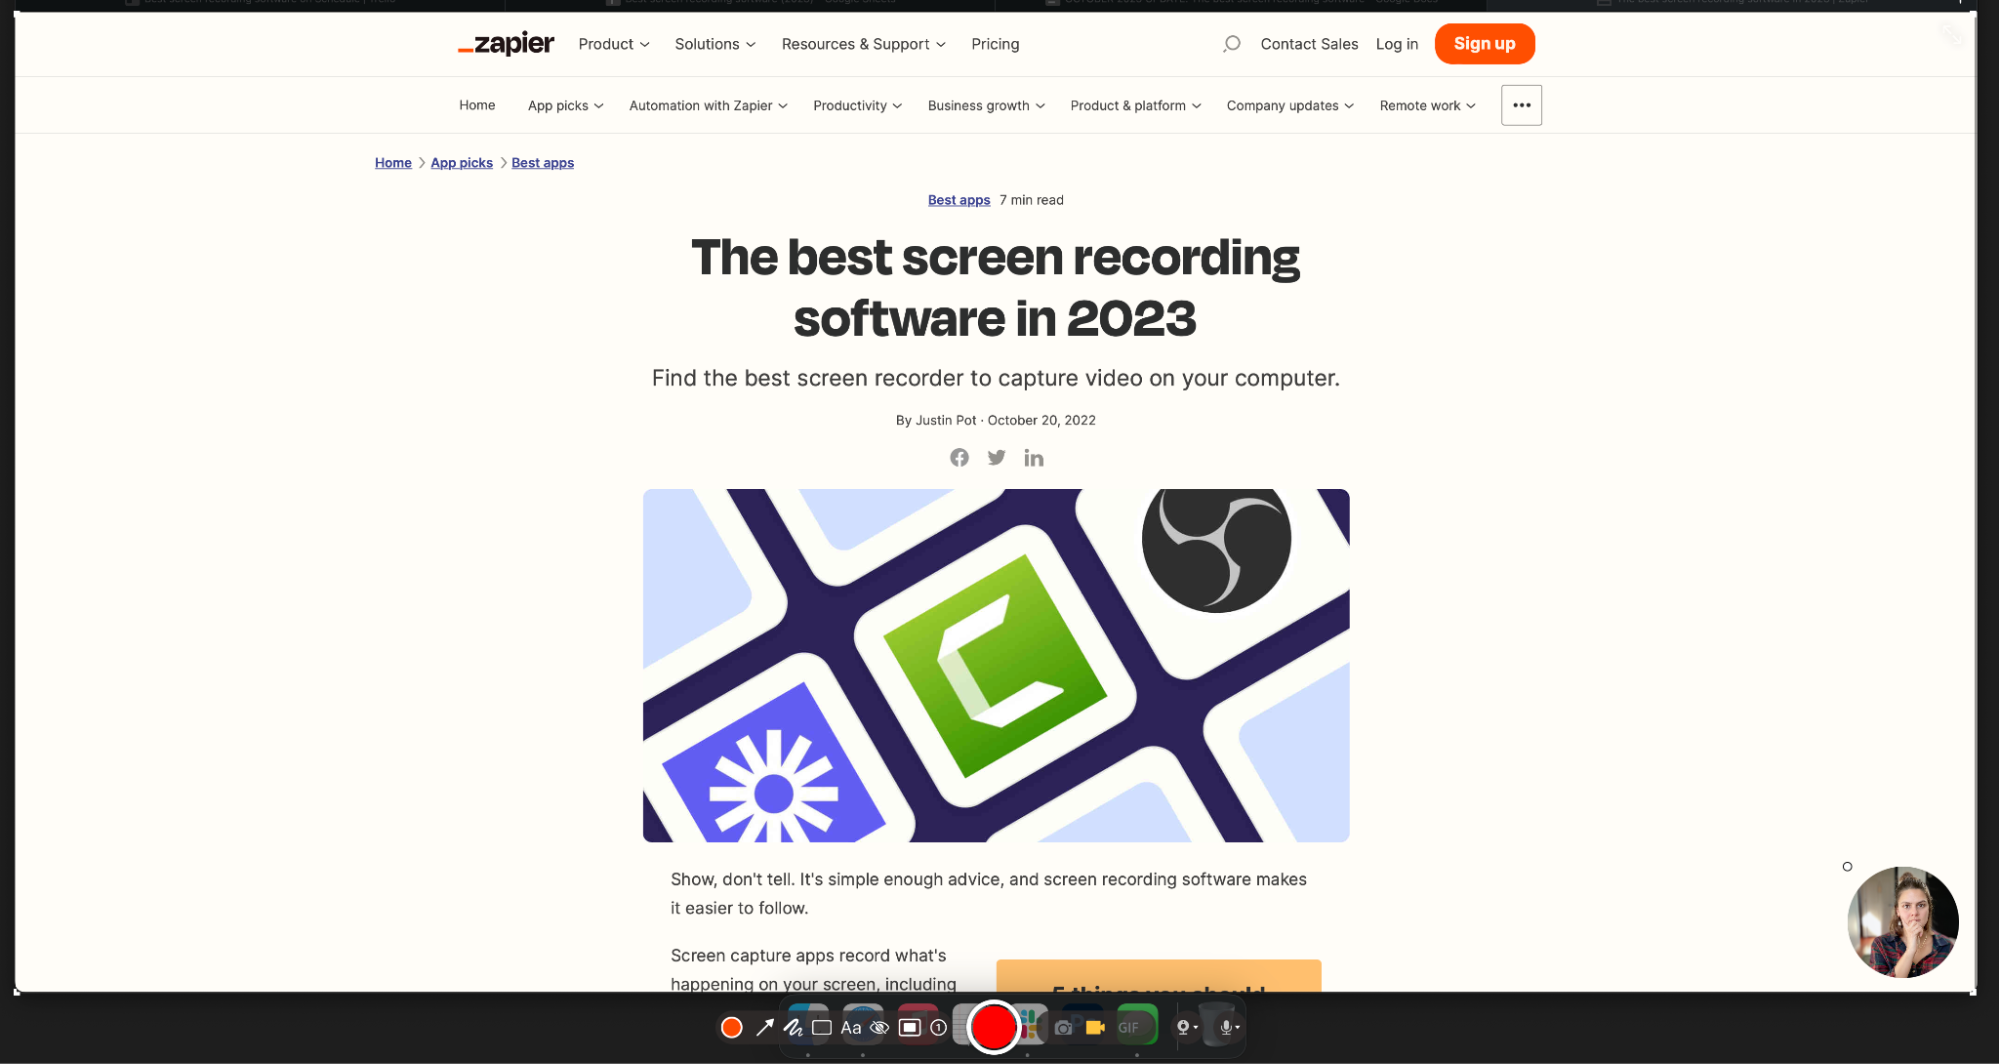 7 Awesome Free Screen Recording Tools